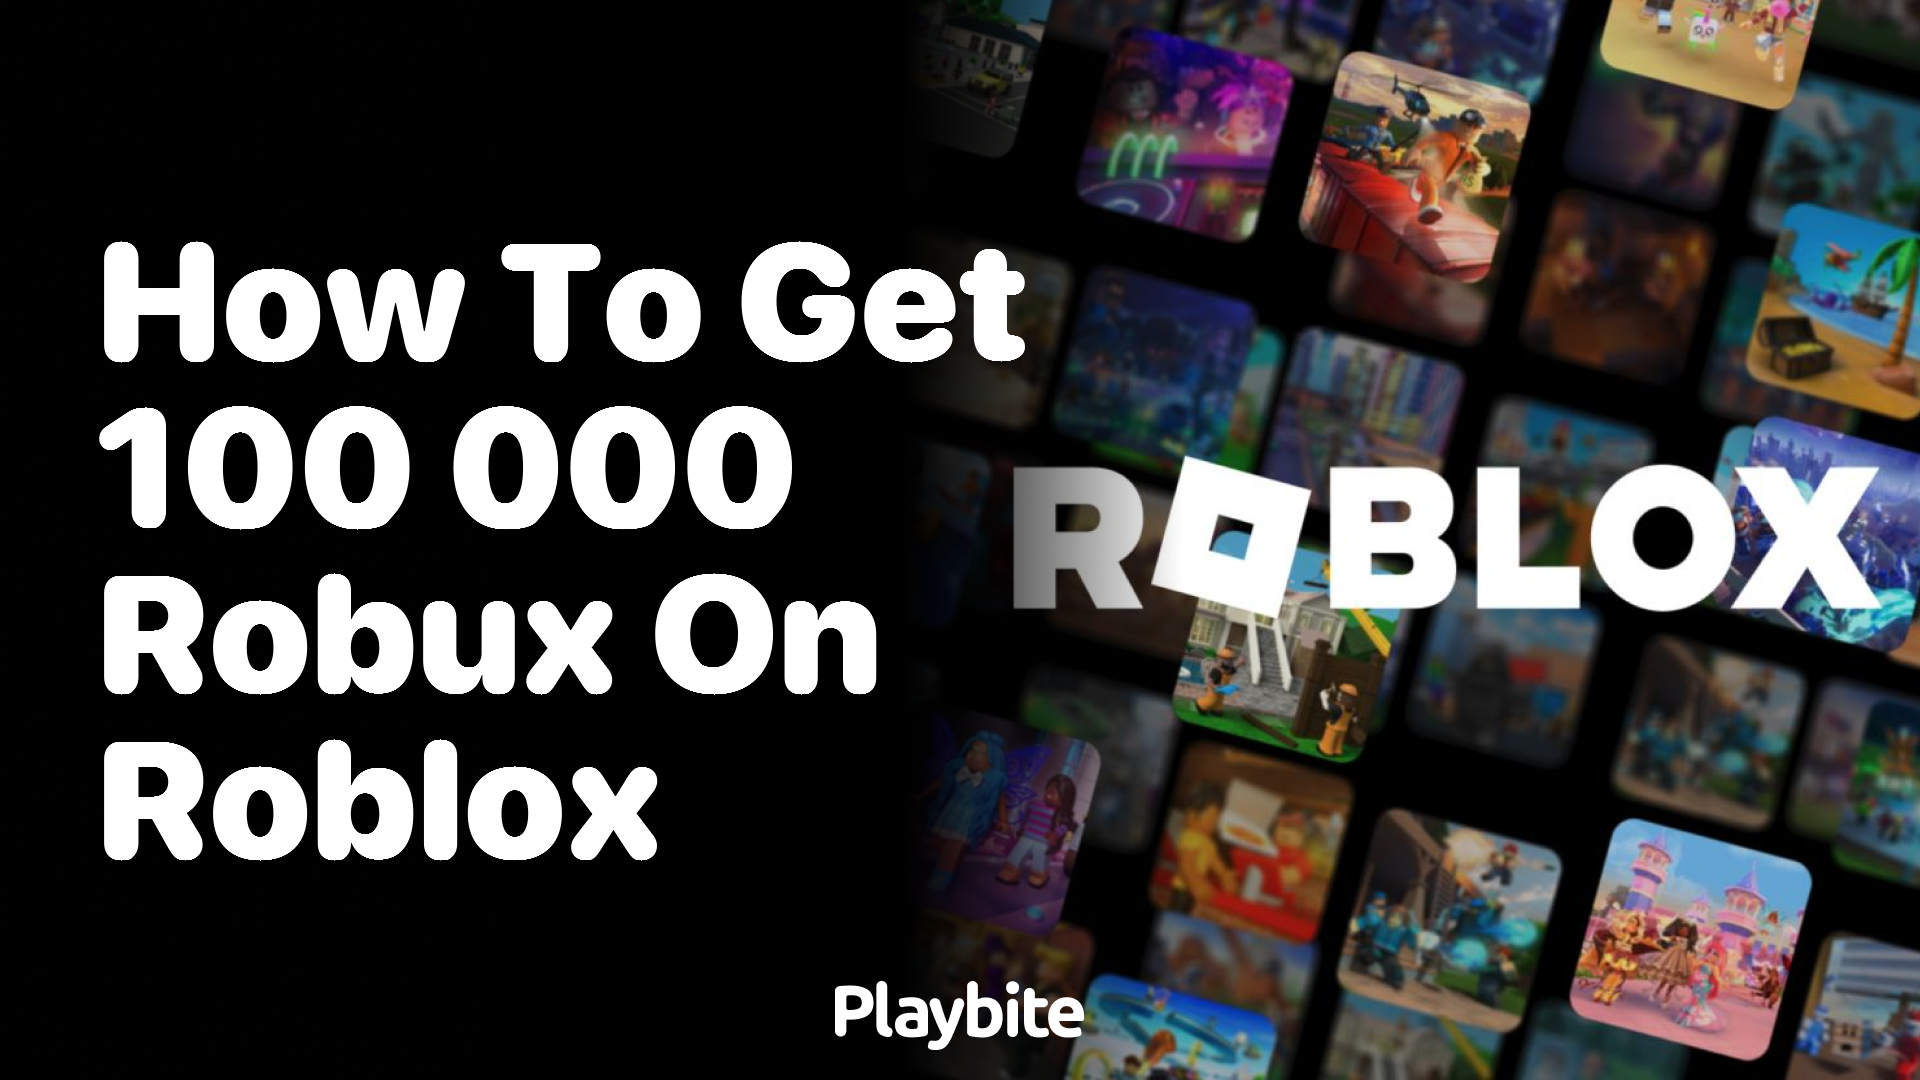 How to Get 100,000 Robux on Roblox